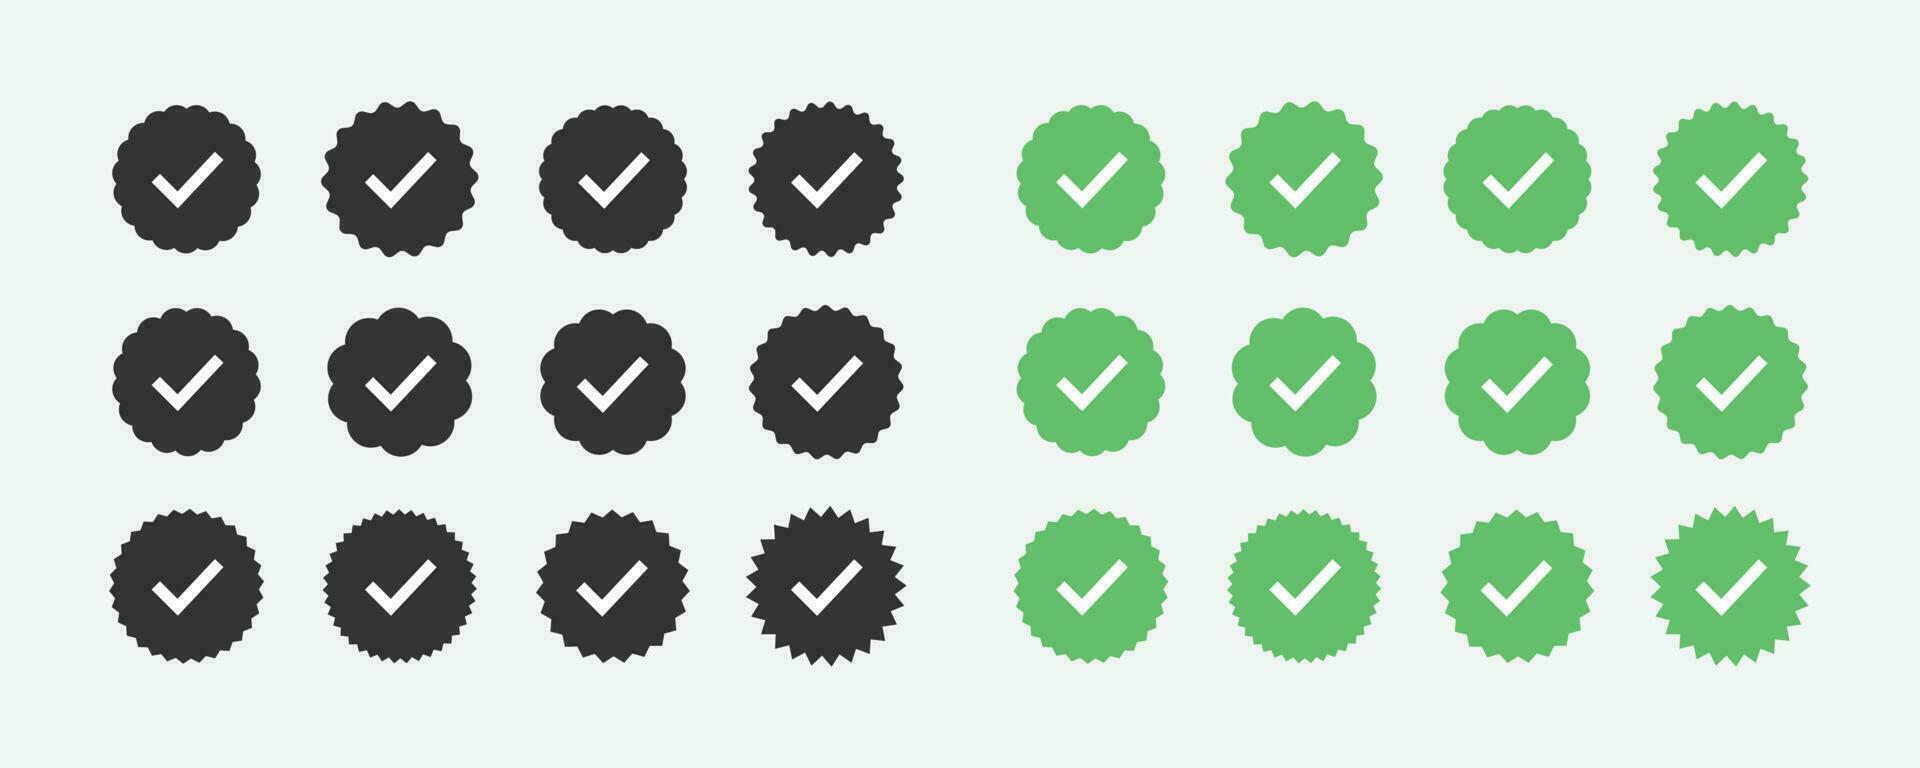 Warranty and quality badge set vector